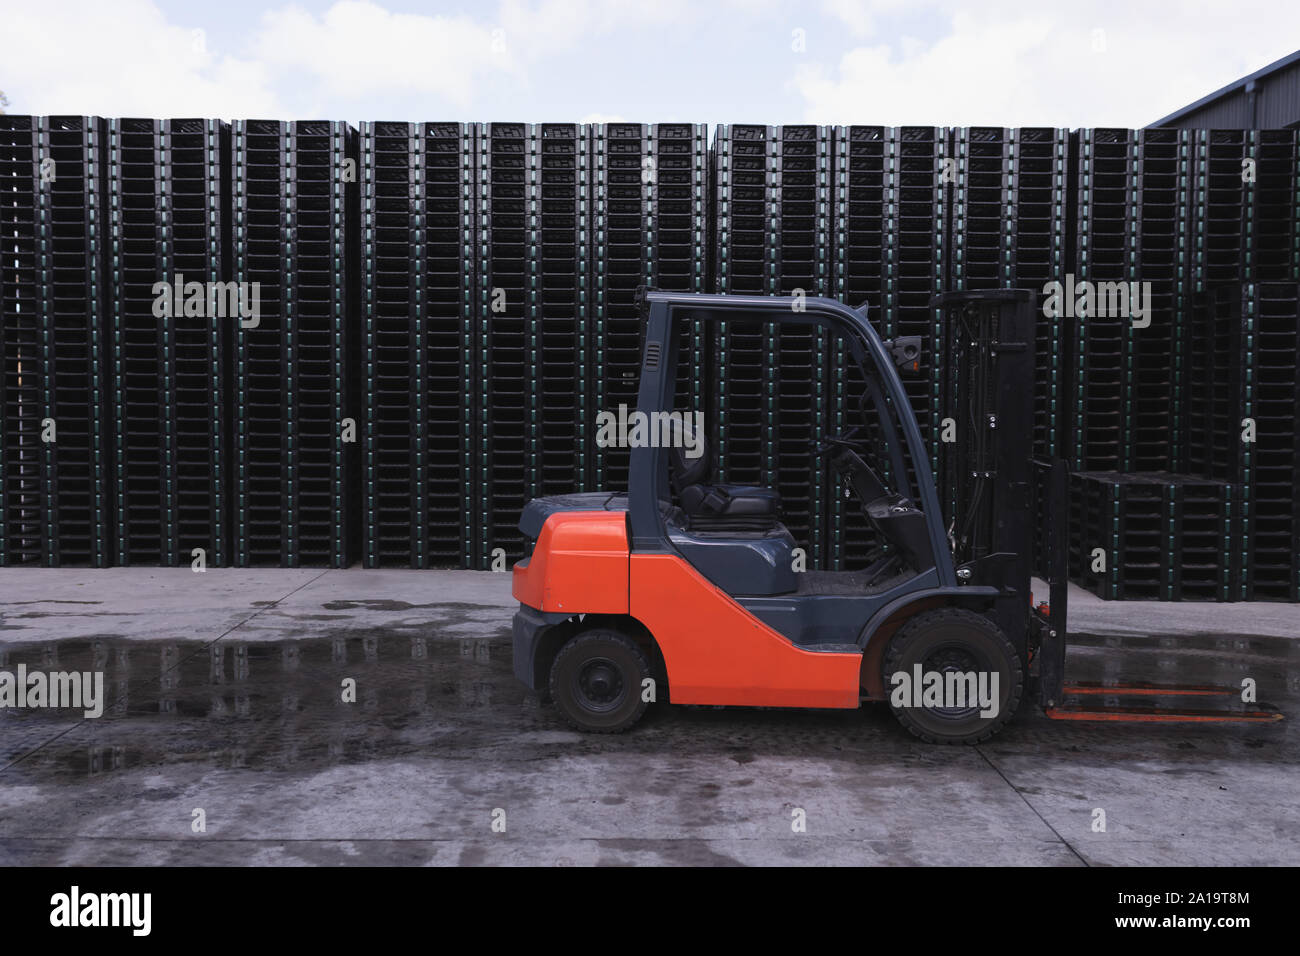 Forklift Truck Outside Warehouse Building Stock Photo Alamy